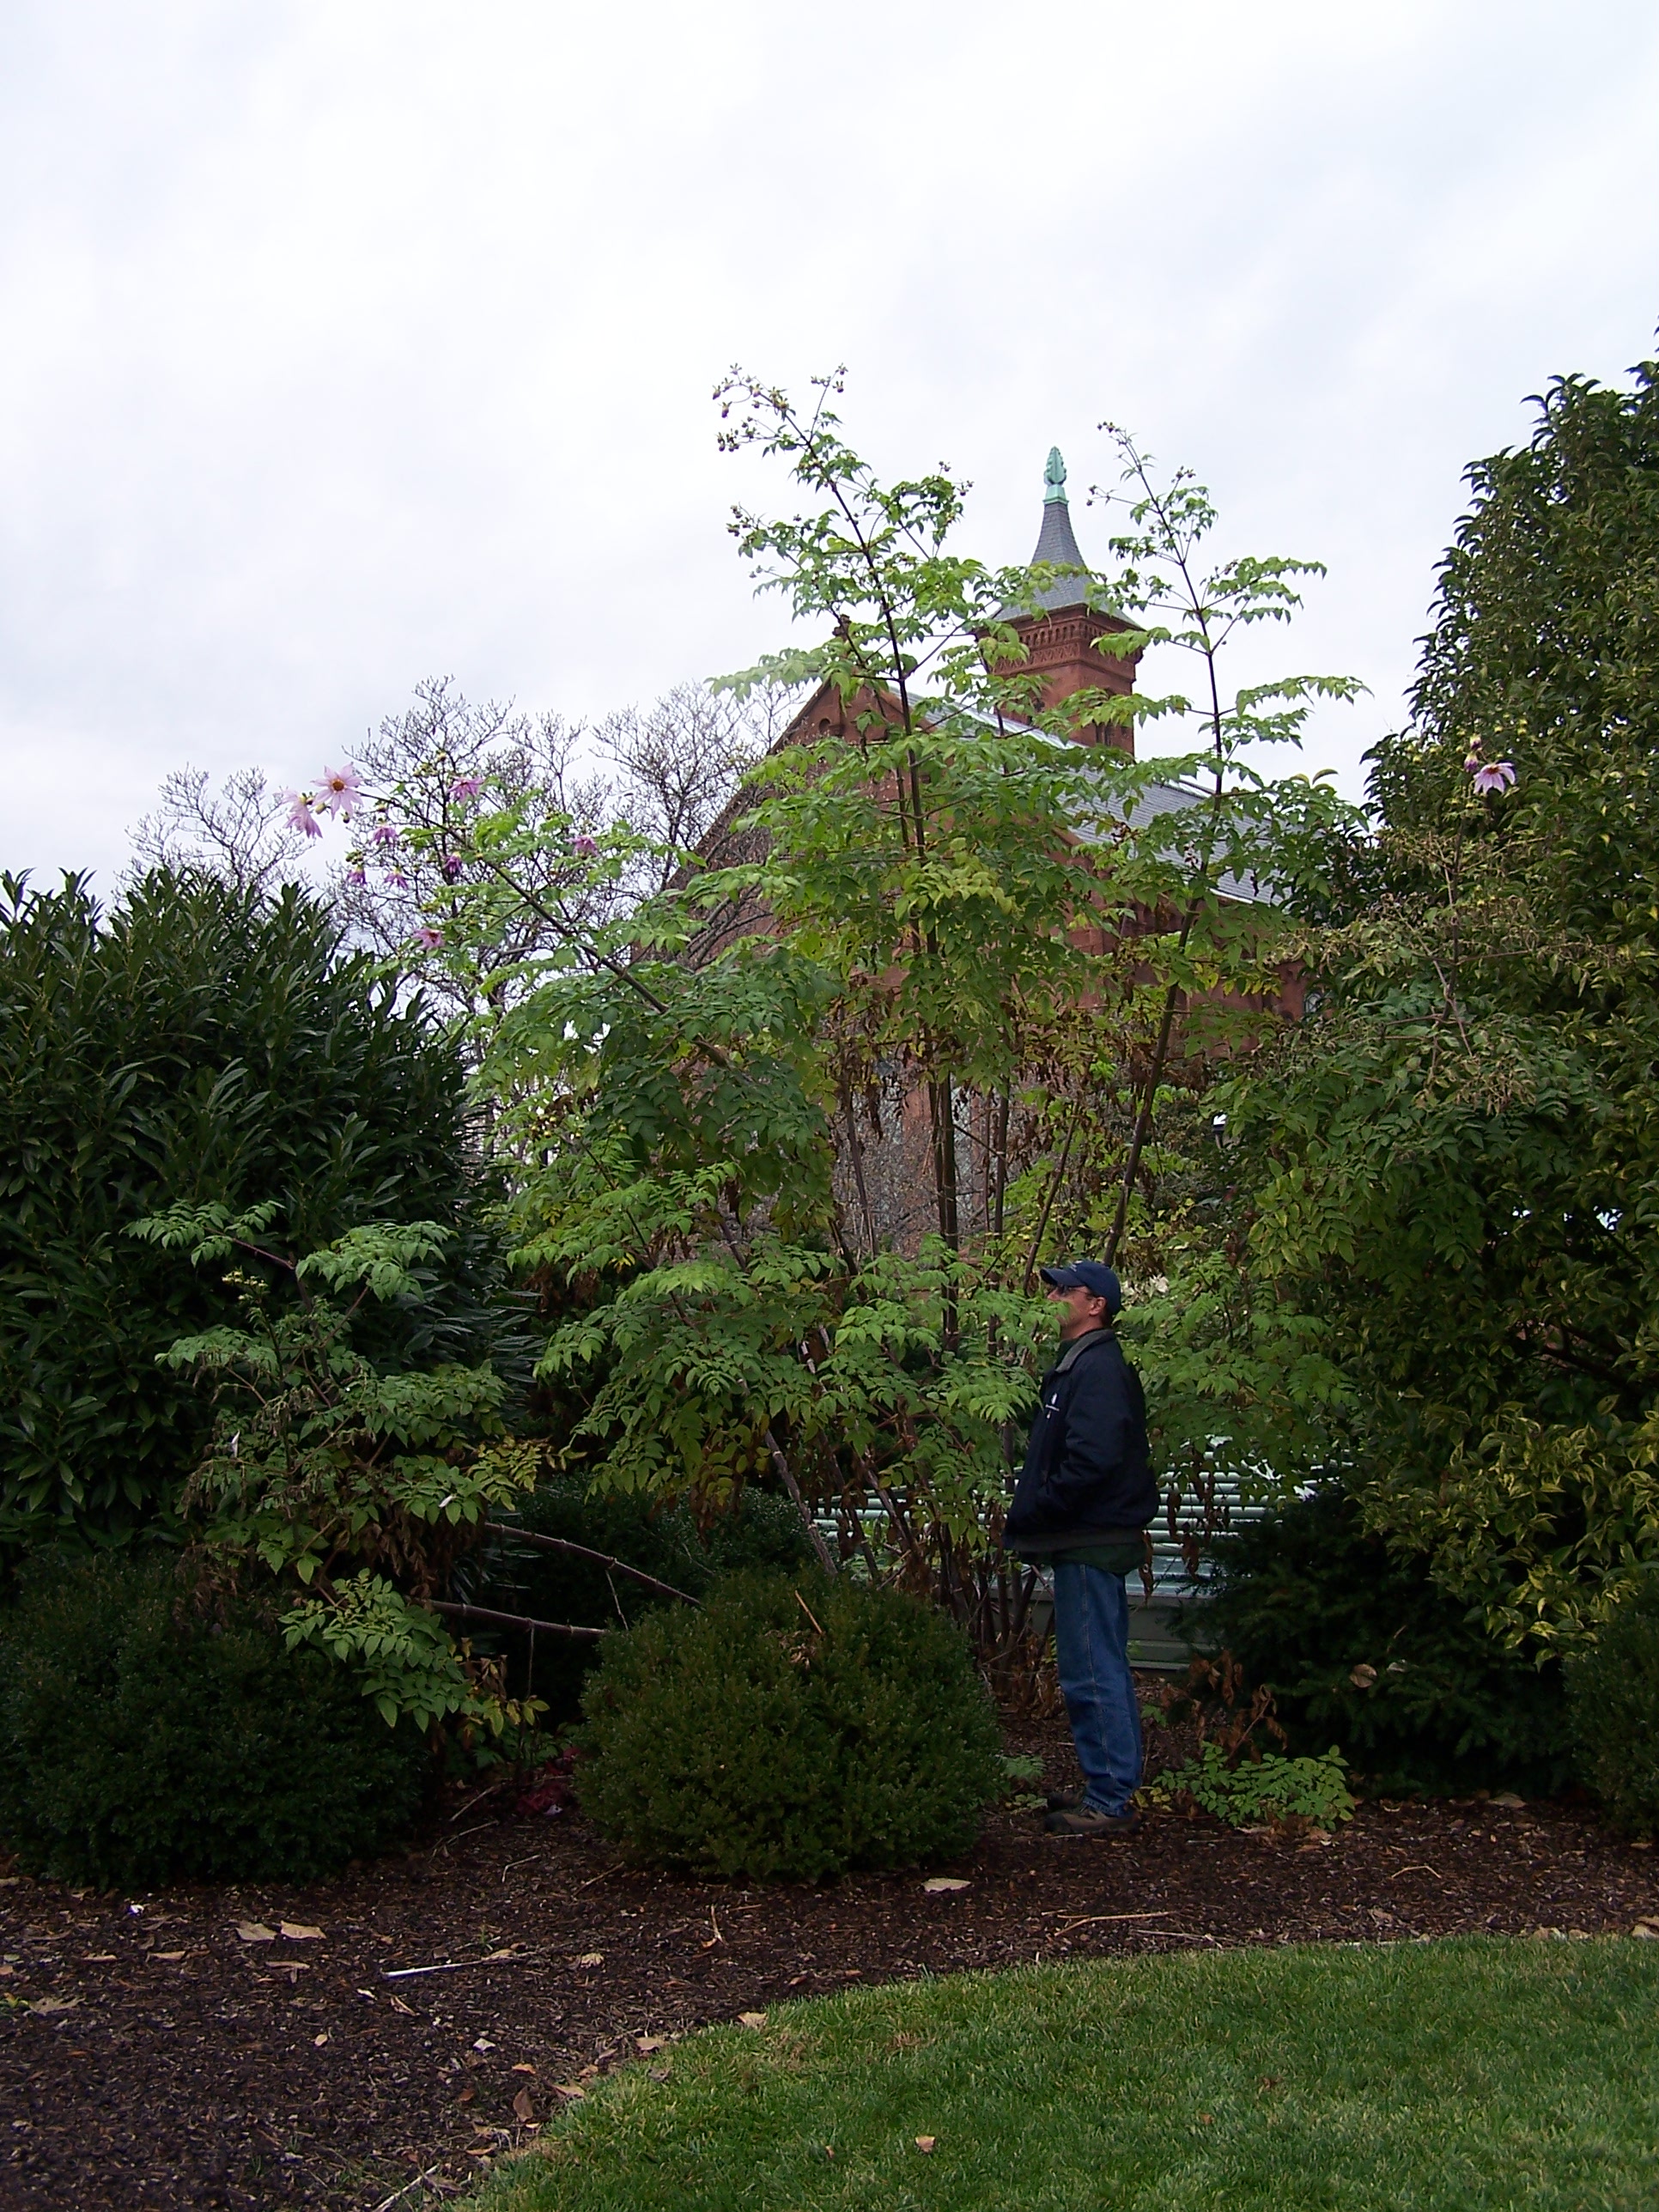 Photo showing a member of Smithsonian Staff, showing immense size of plant